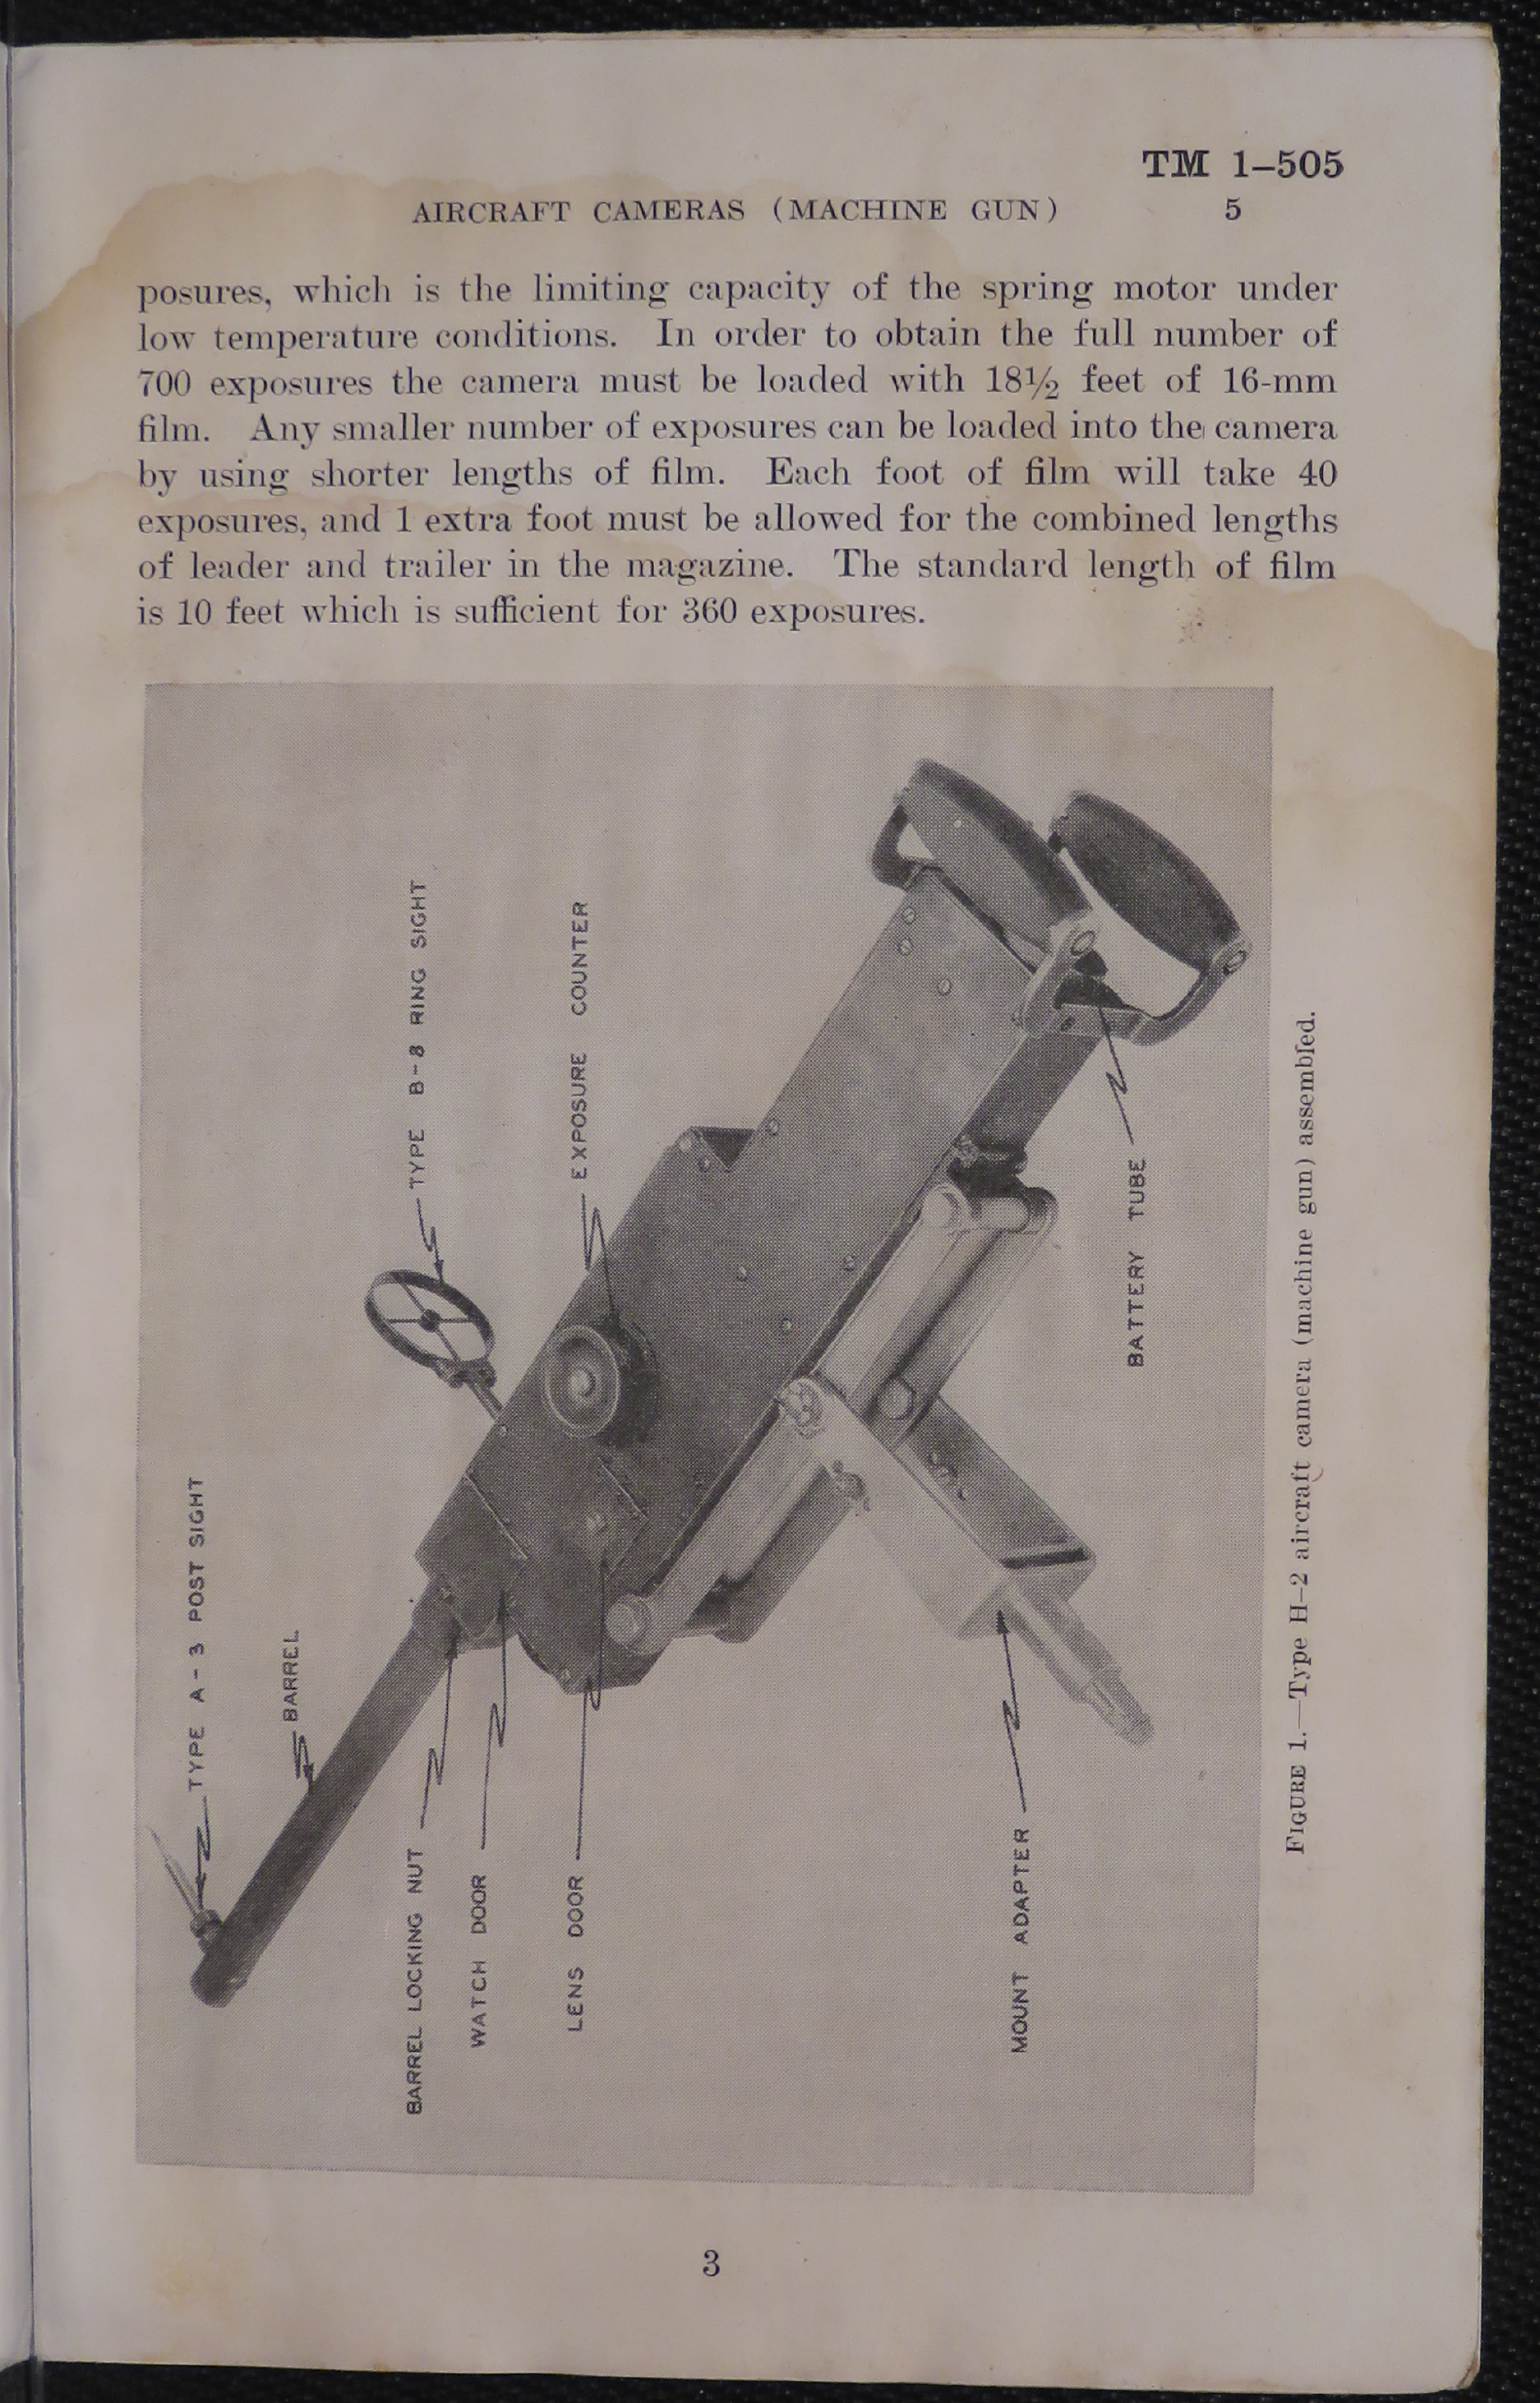 Sample page 5 from AirCorps Library document: Aircraft Cameras (Machine Gun)